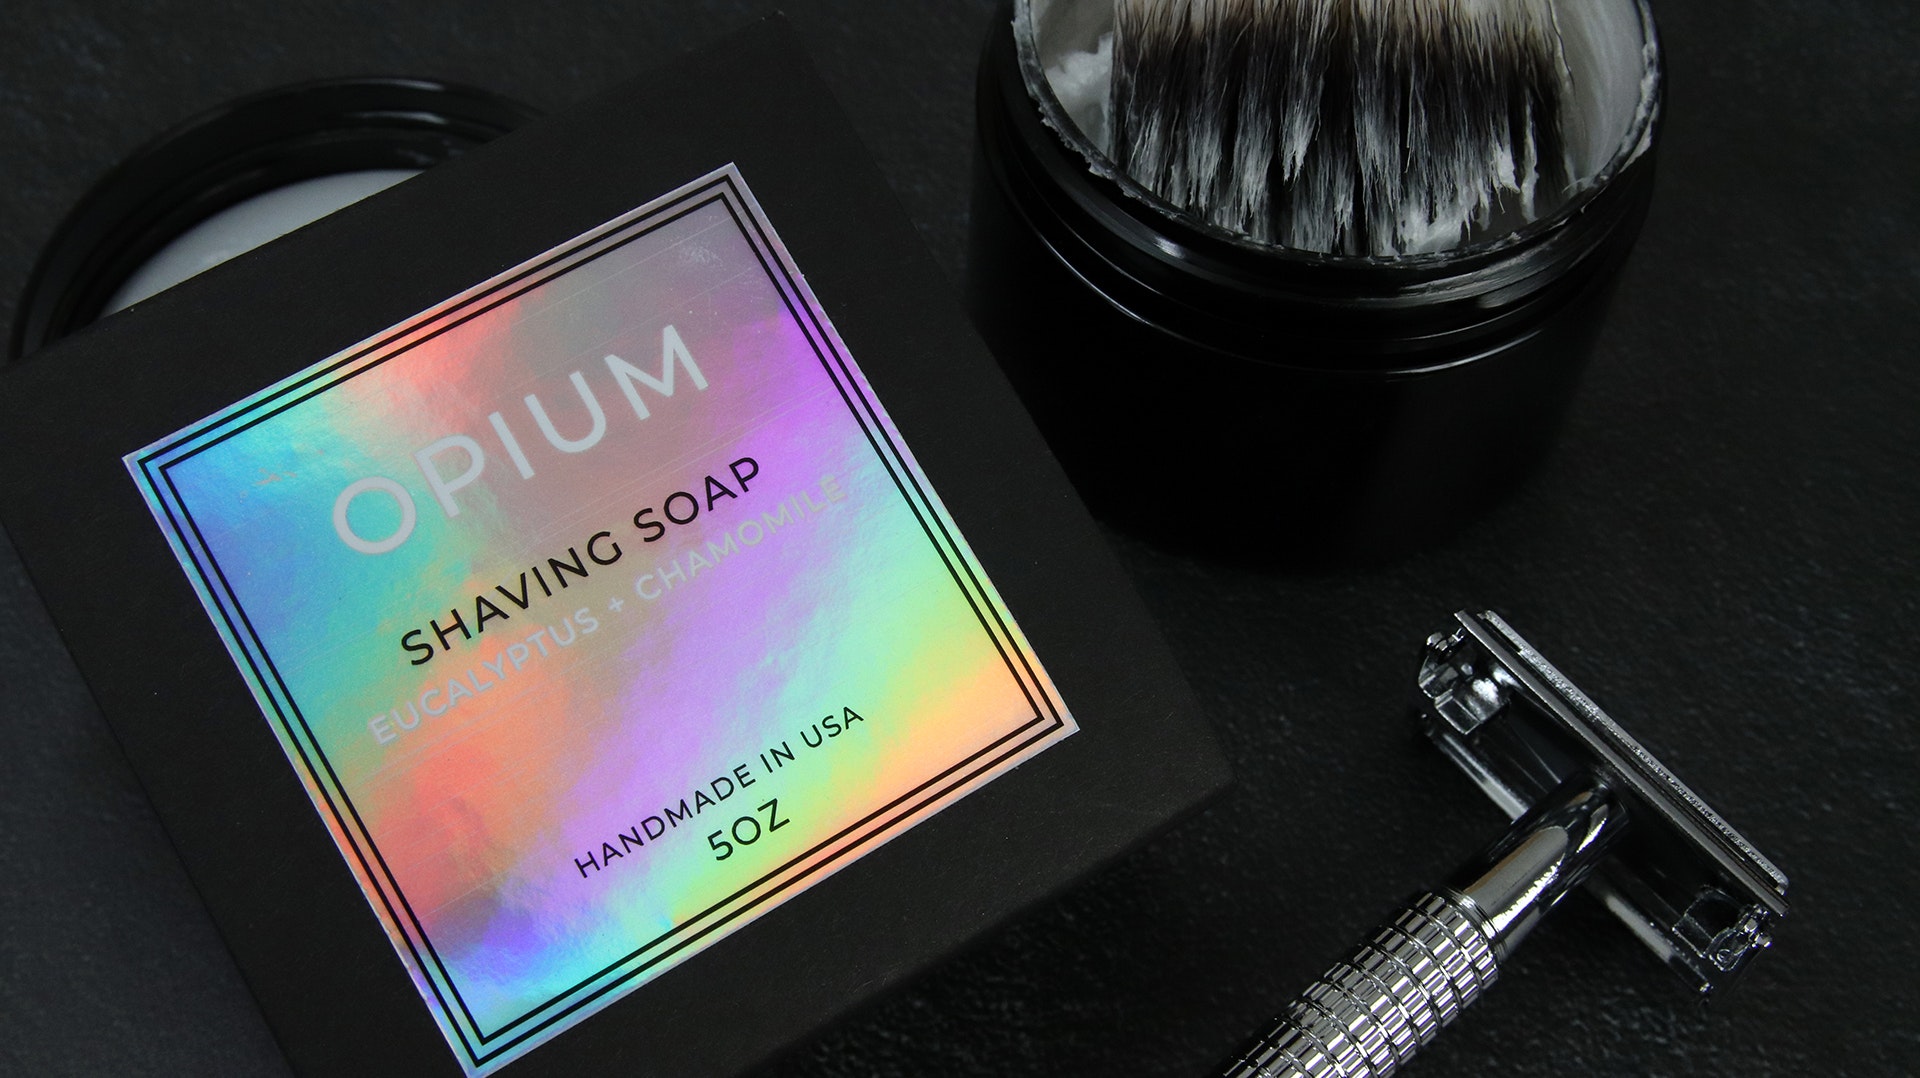 Square holographic sticker applied to black soap box next to shaving tools